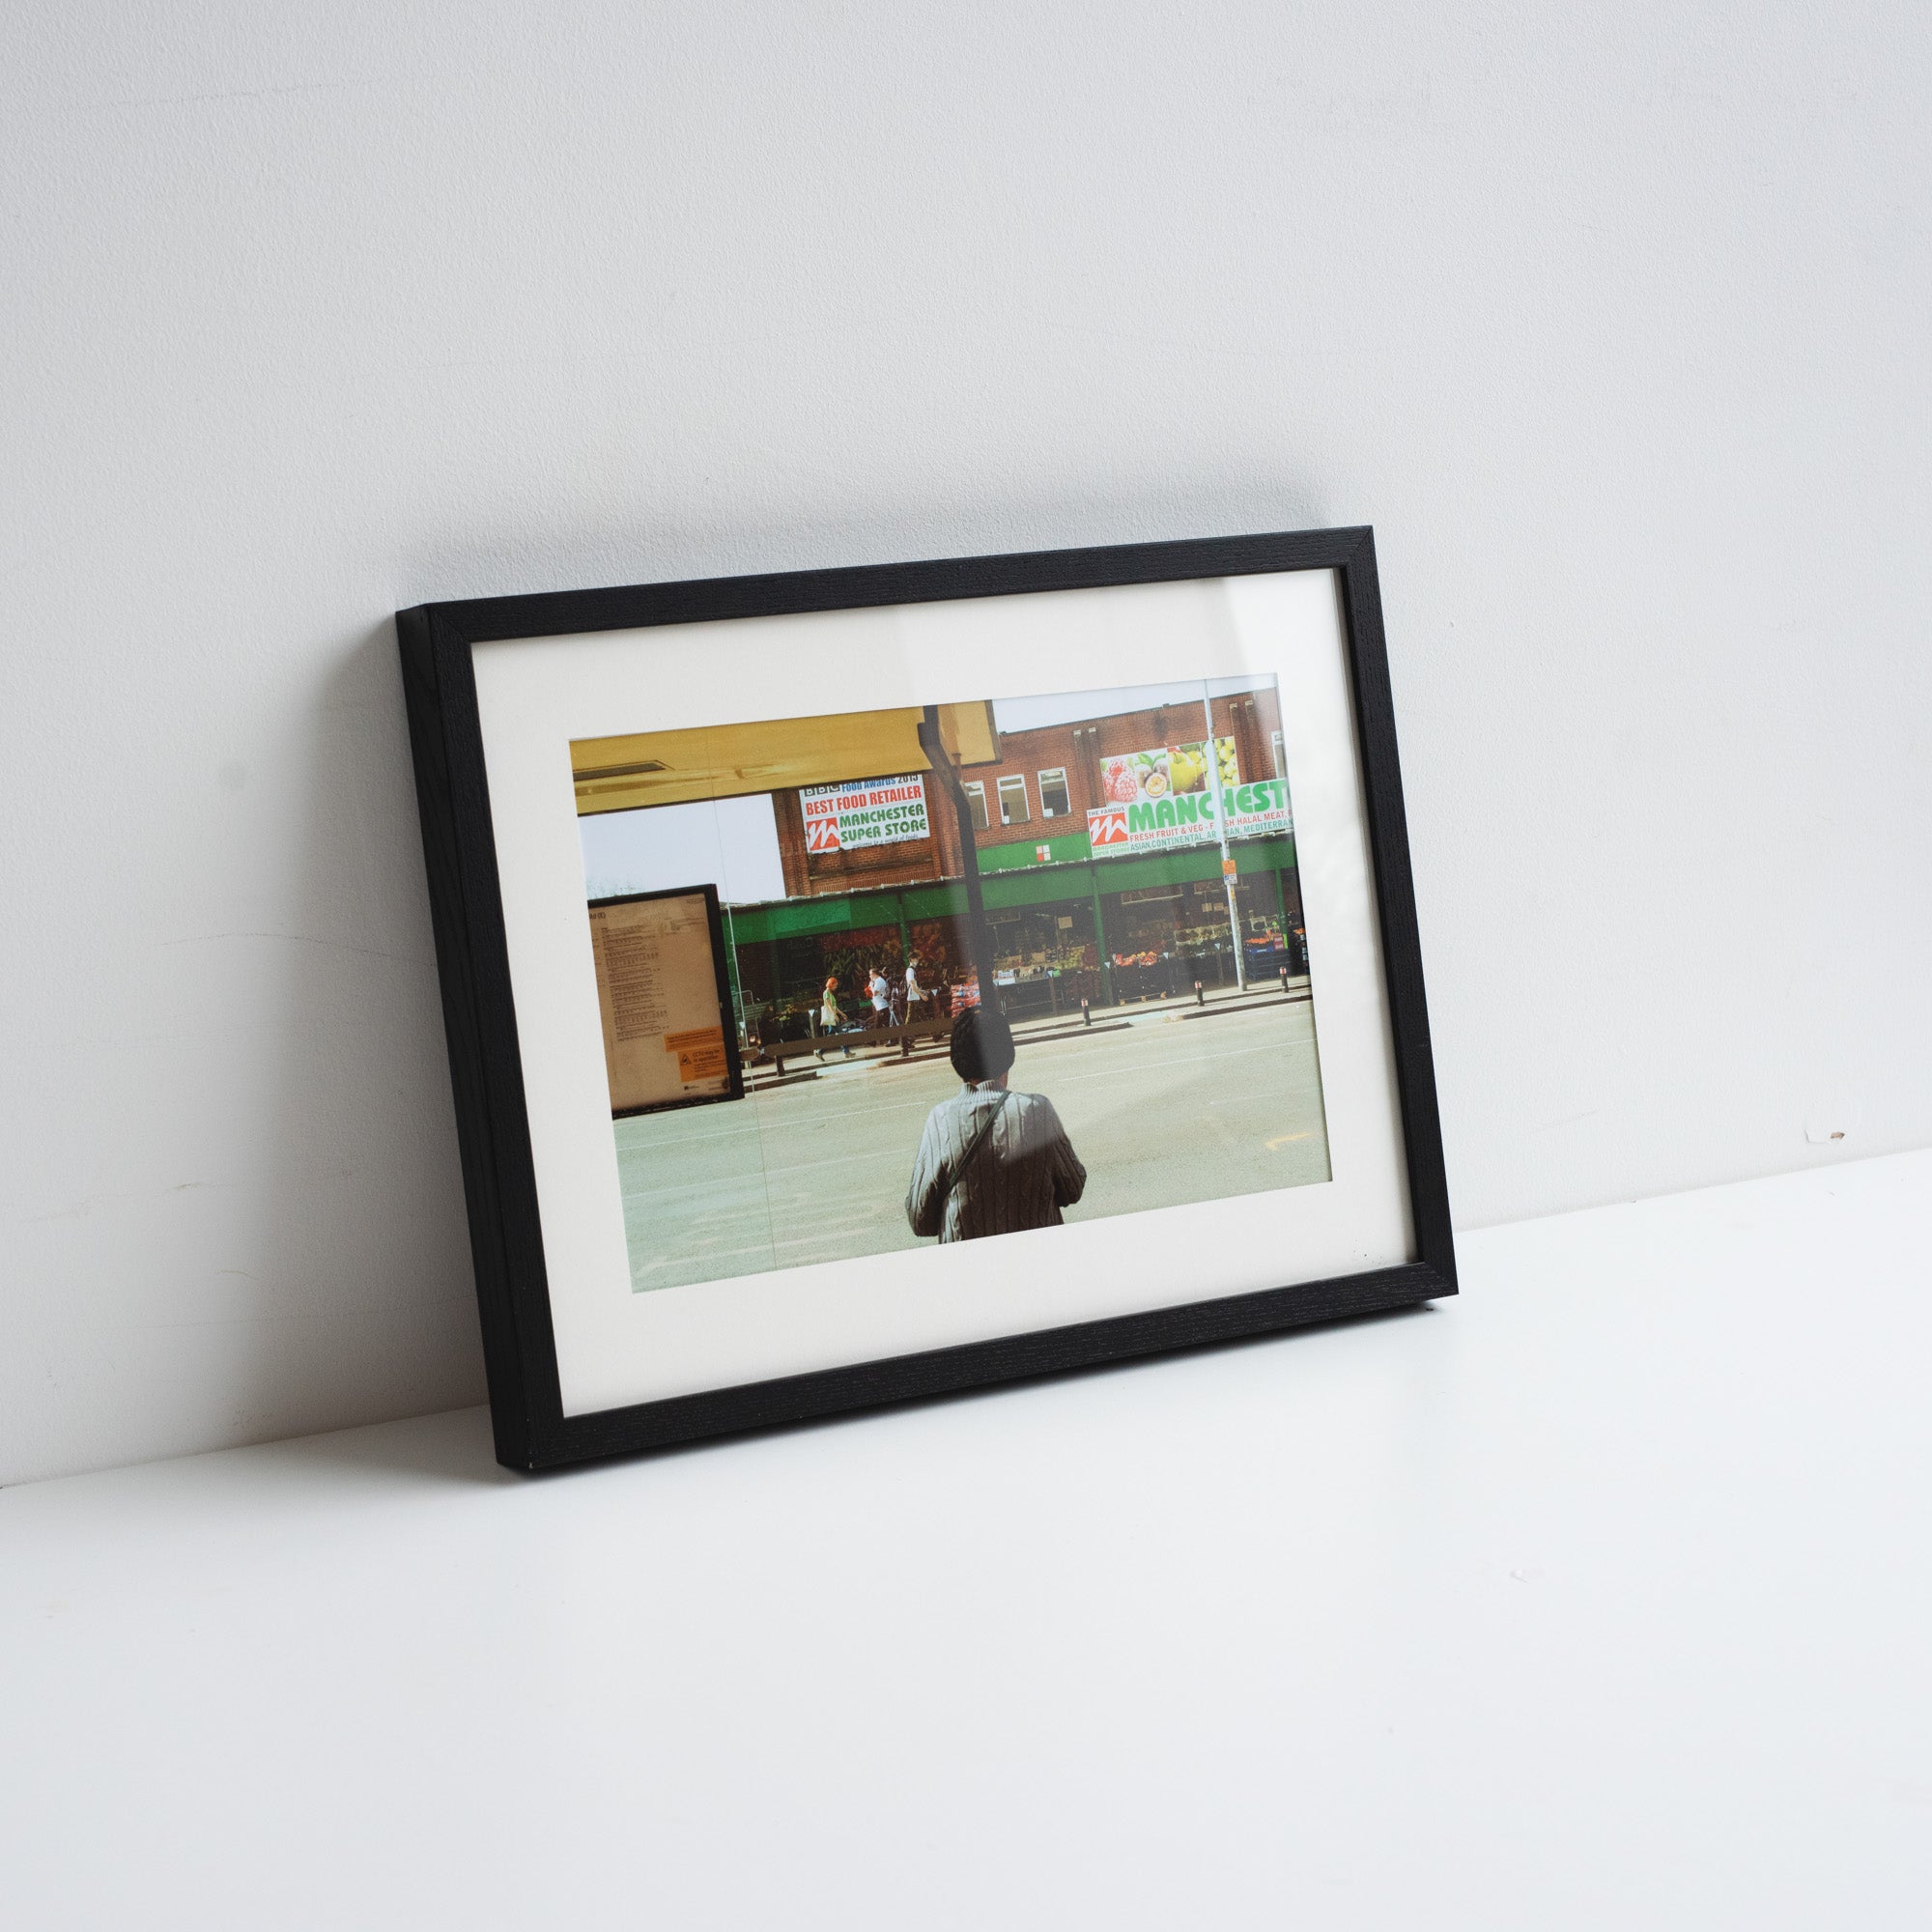 A printed reproduction of a photograph by Chris Naylor of a man looking our to a groceries shop in Manchester. Placed in a black frame leaning against a white wall.